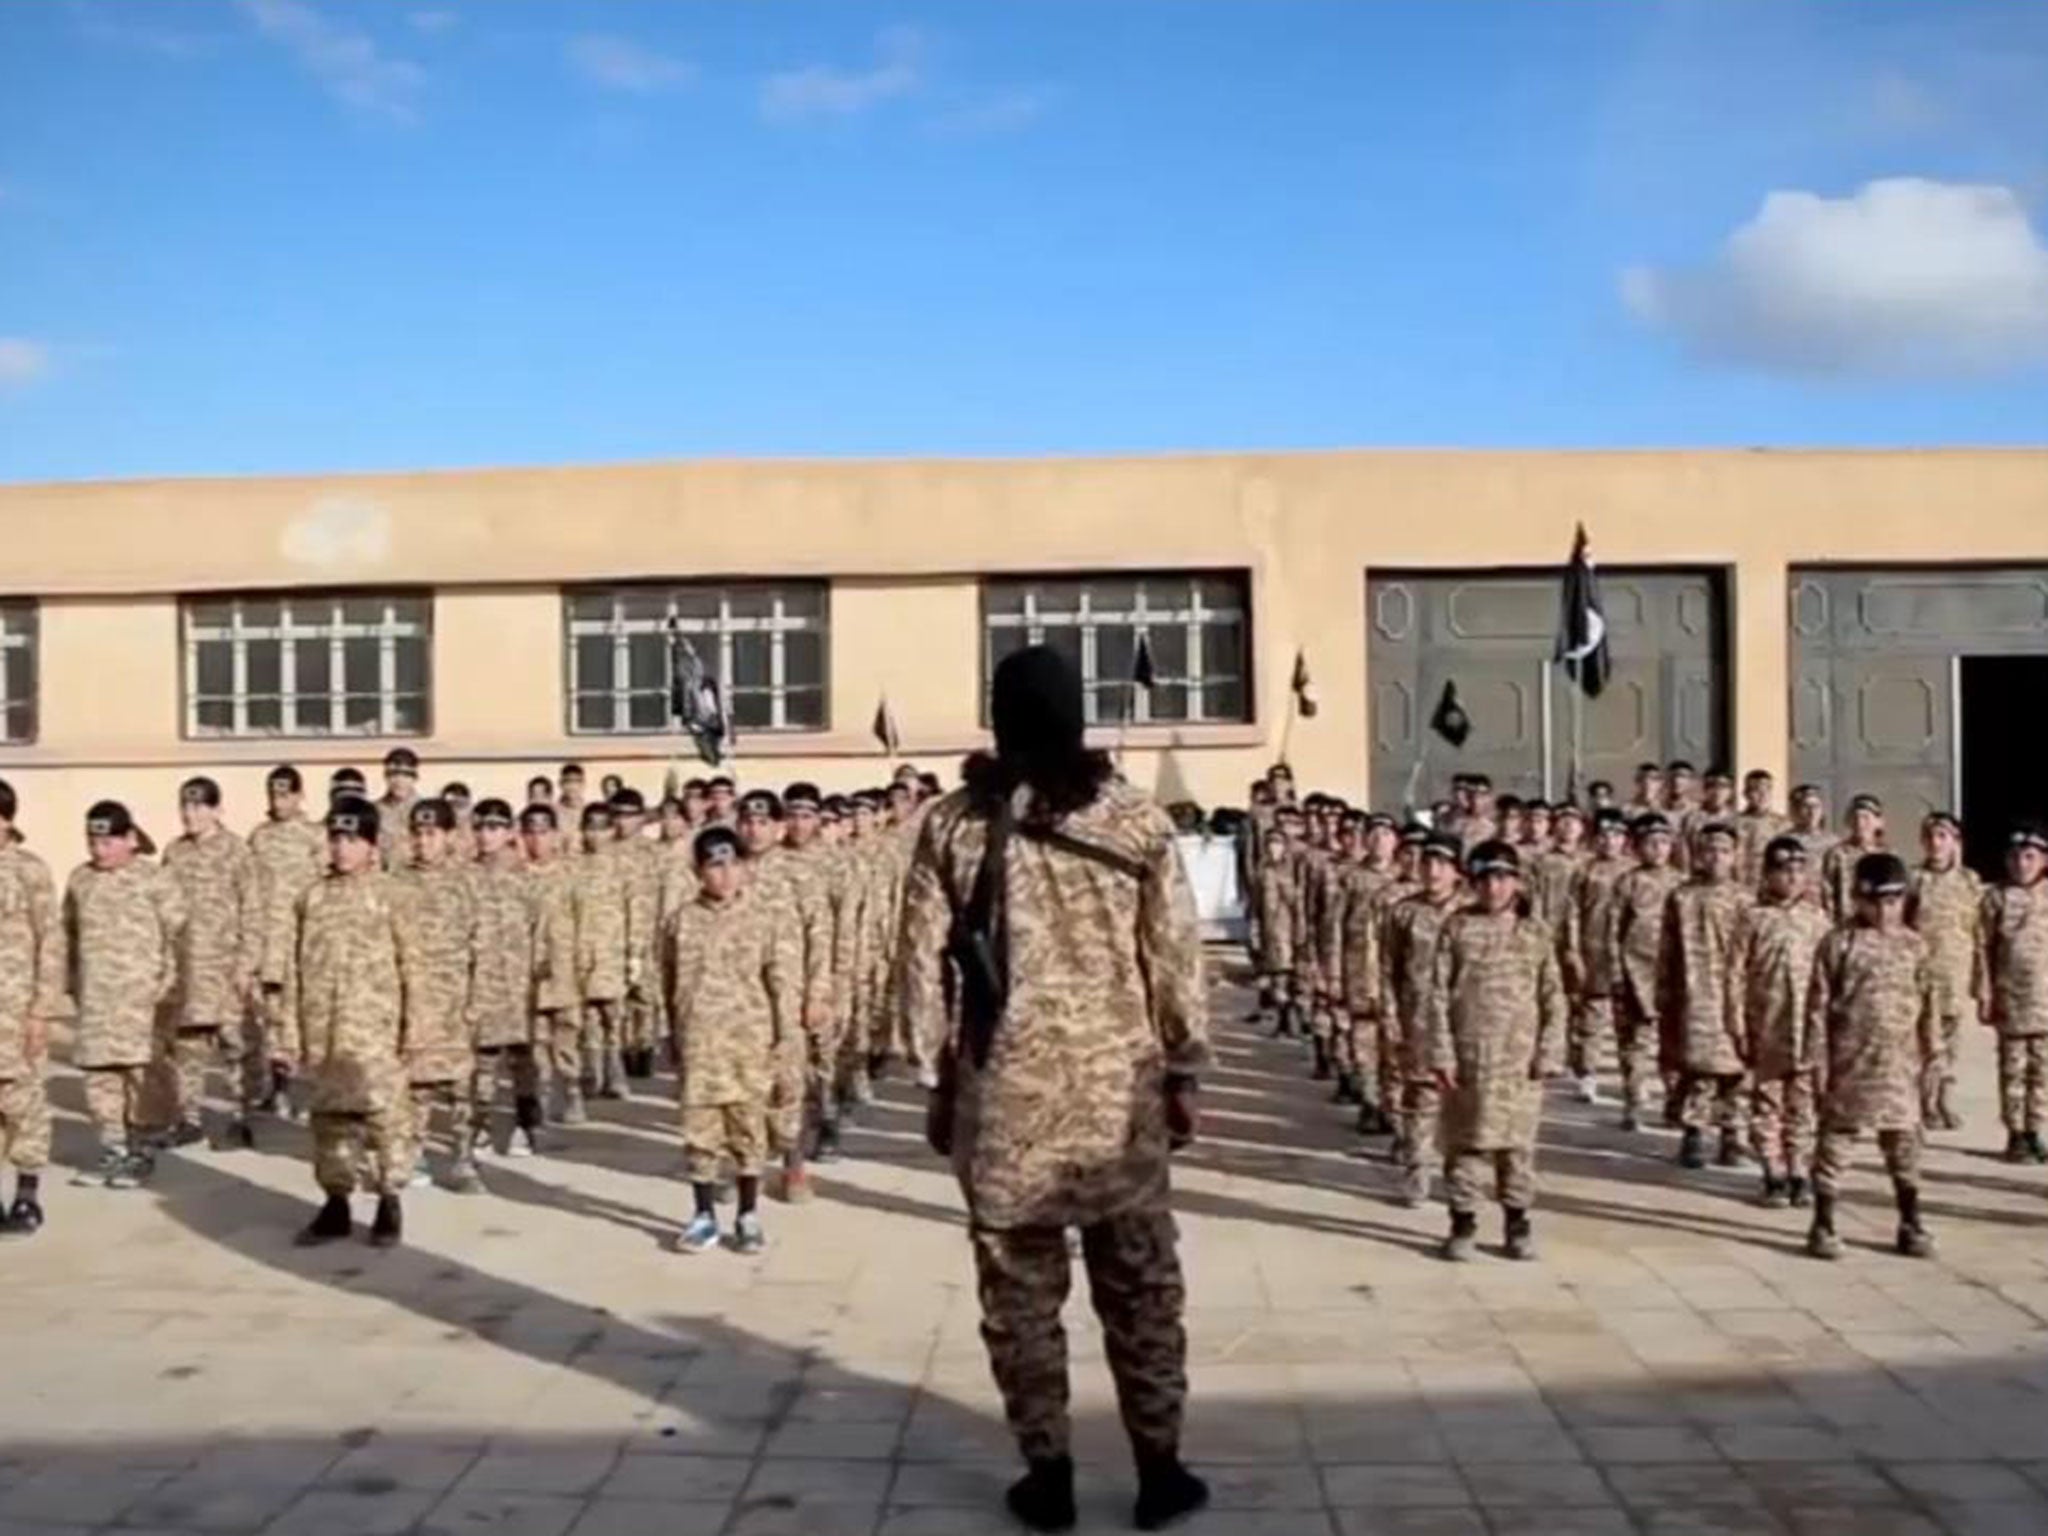 An Isis training camp for child soldiers